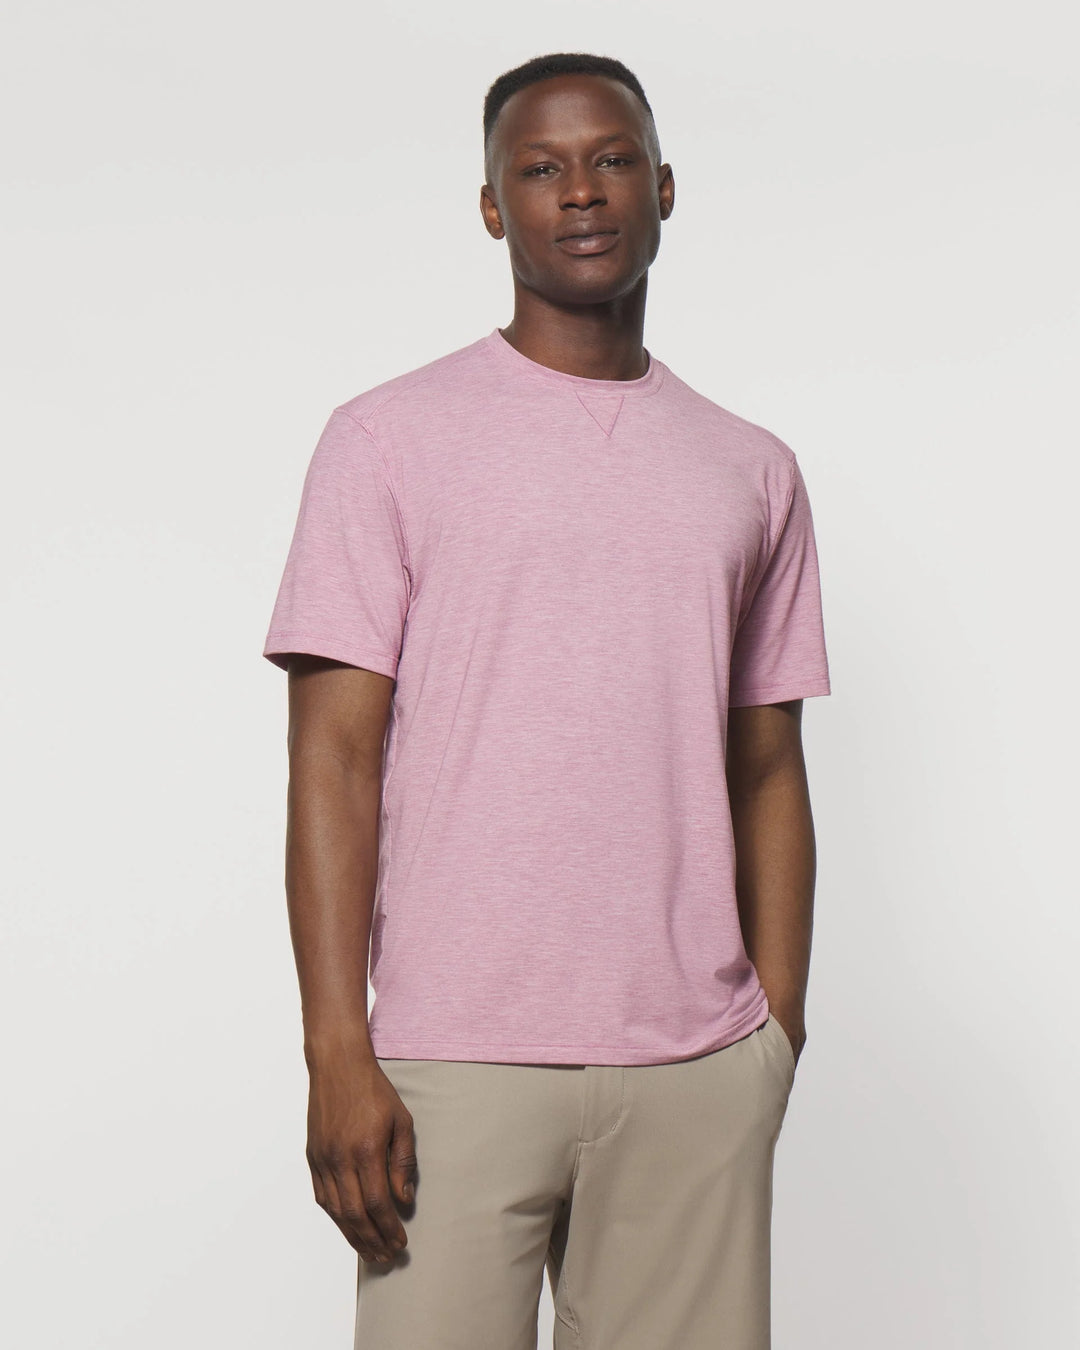 The Course Performance T-Shirt in Apollo